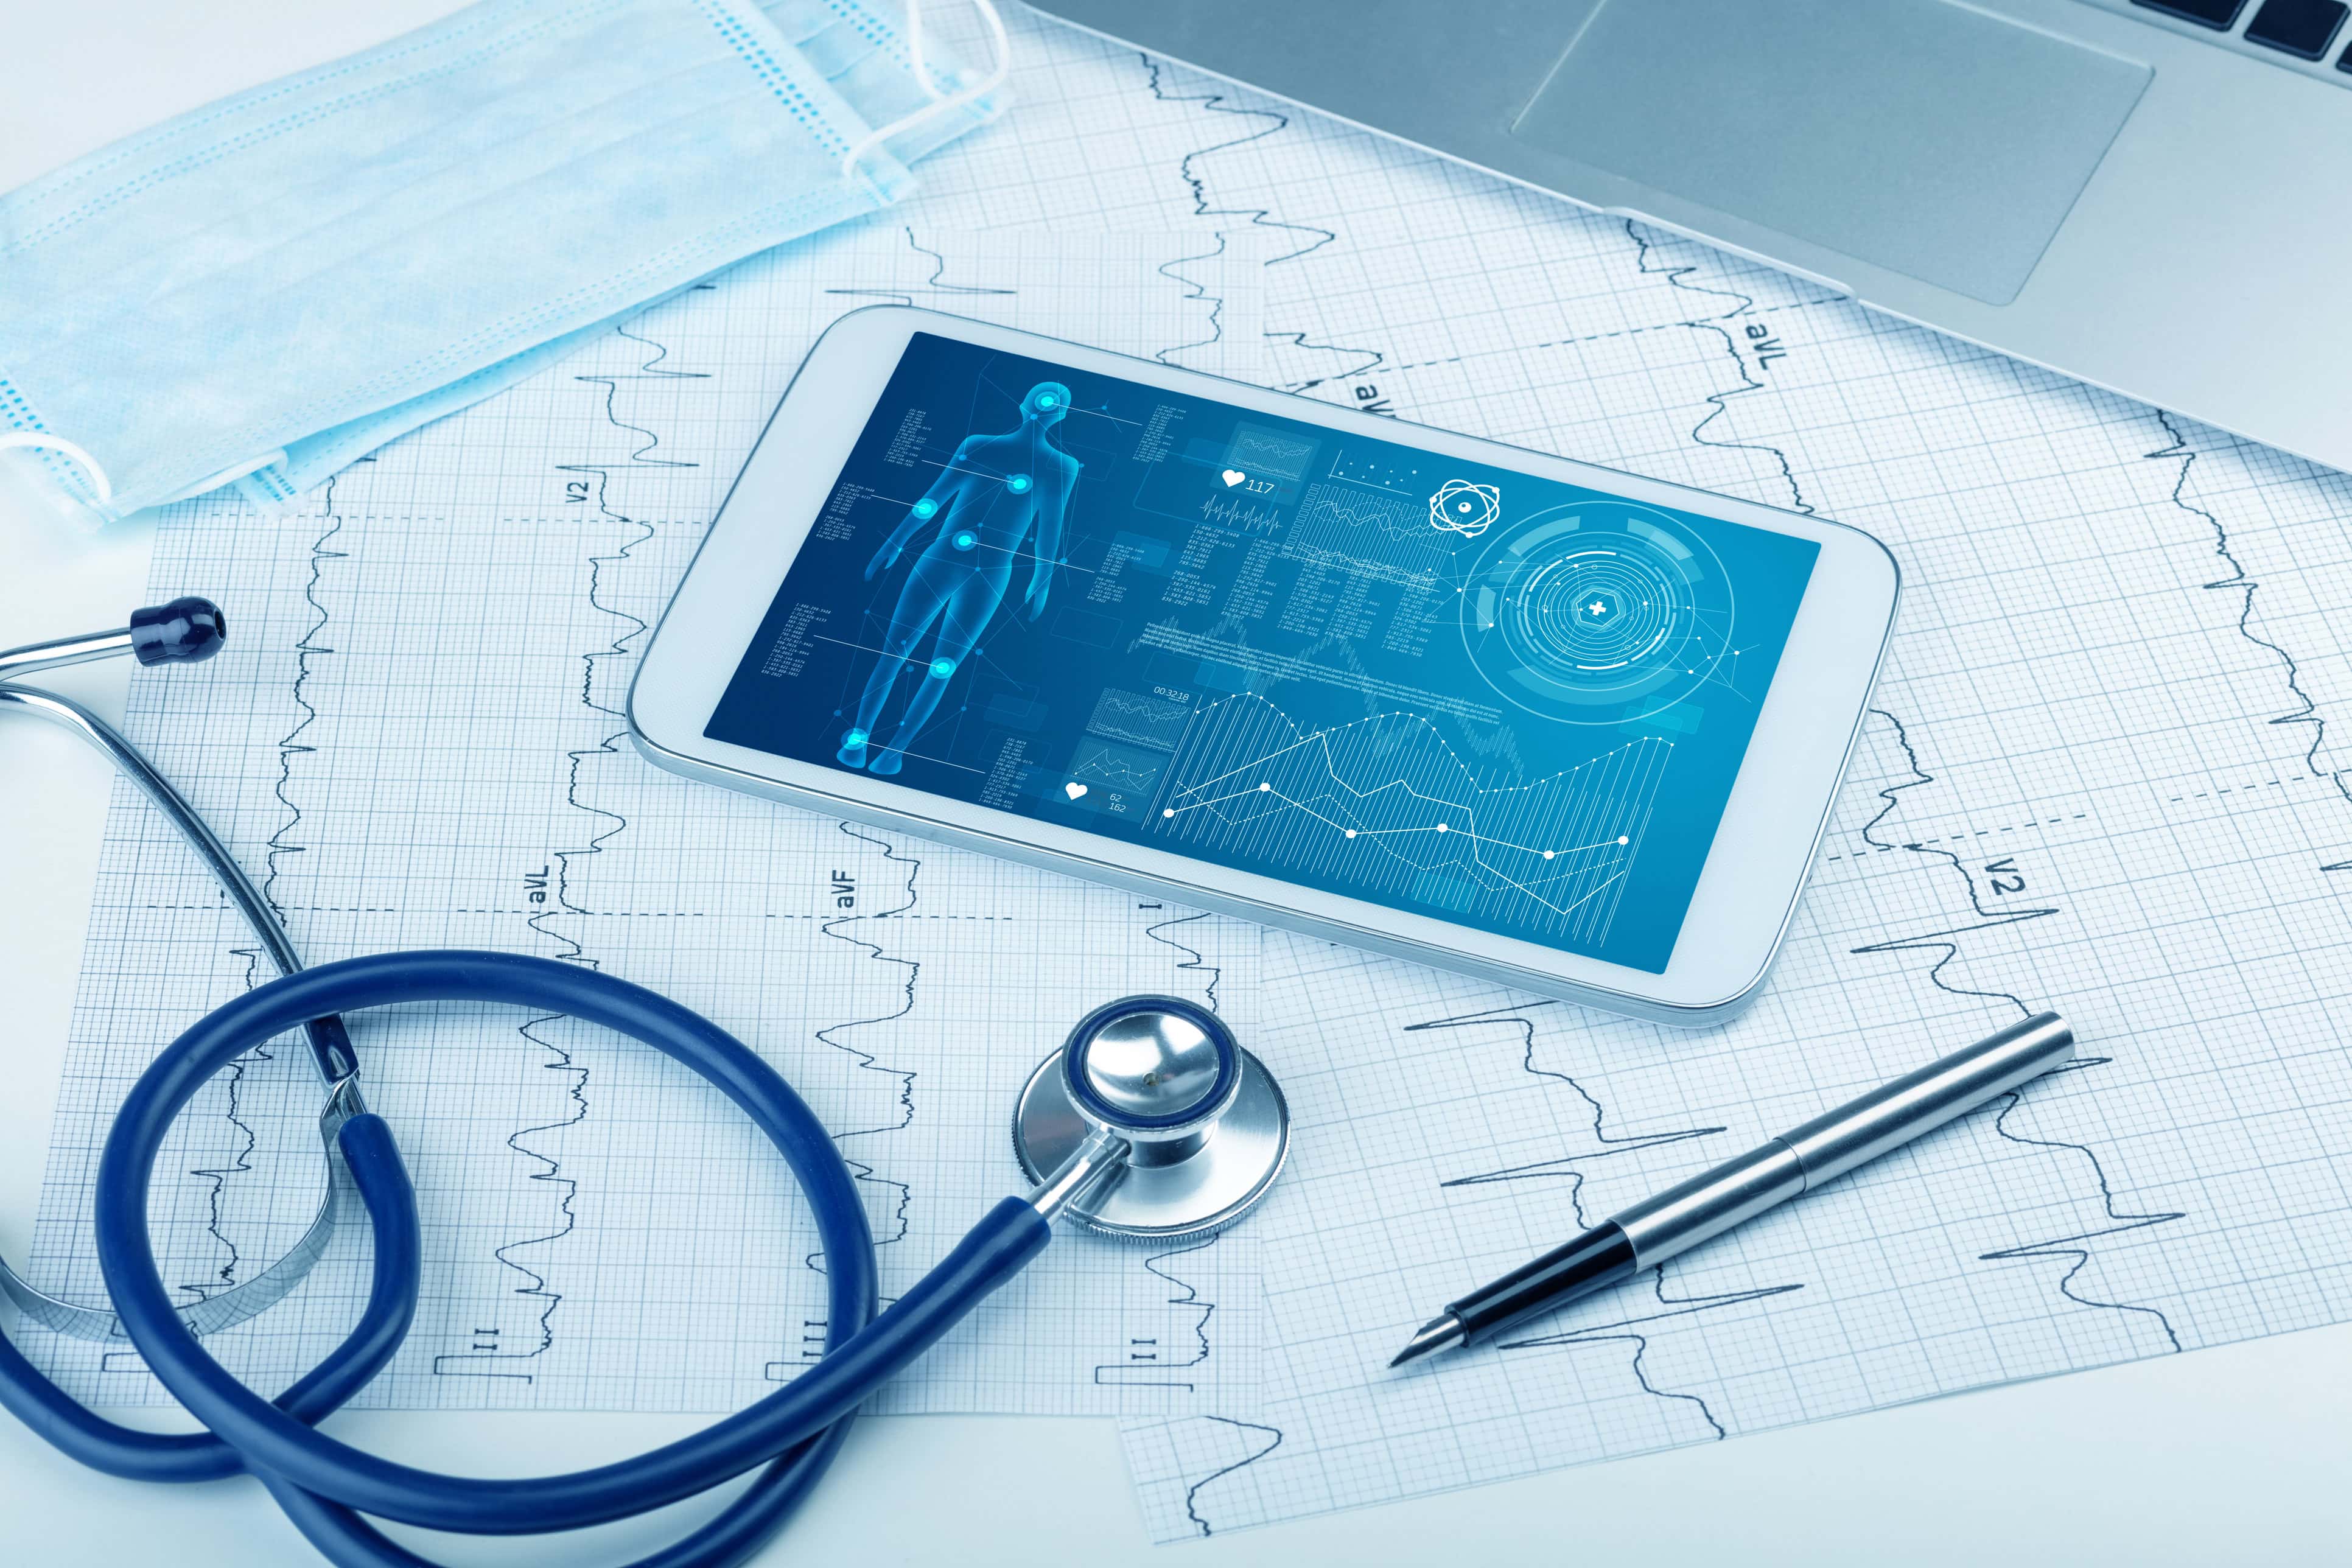 Steps for Safeguarding Connected Medical Devices Against Cyberattacks